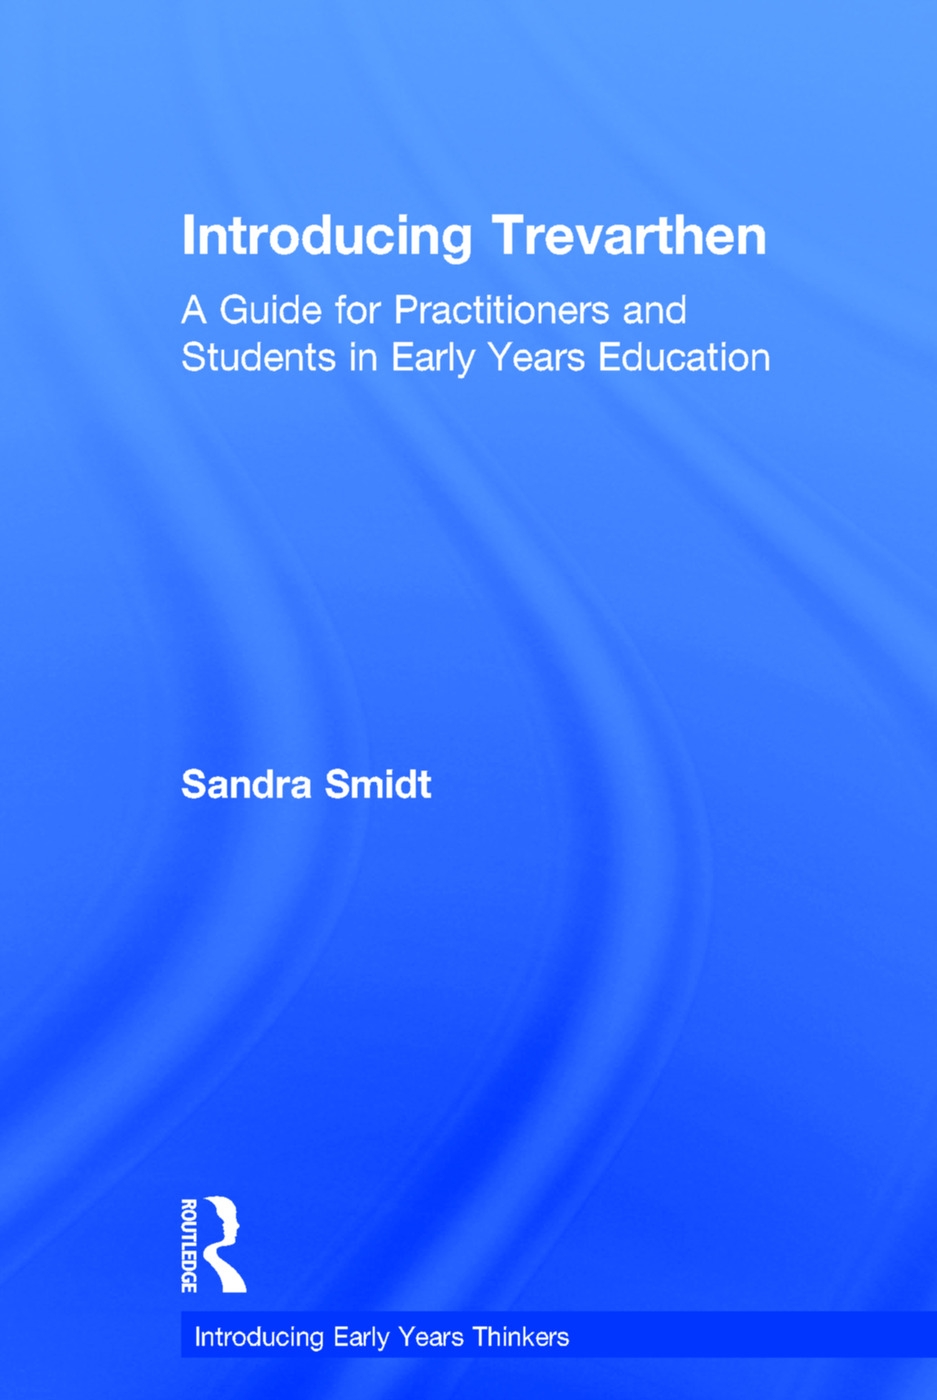 Introducing Trevarthen: A Guide for Practitioners and Students in Early Years Education